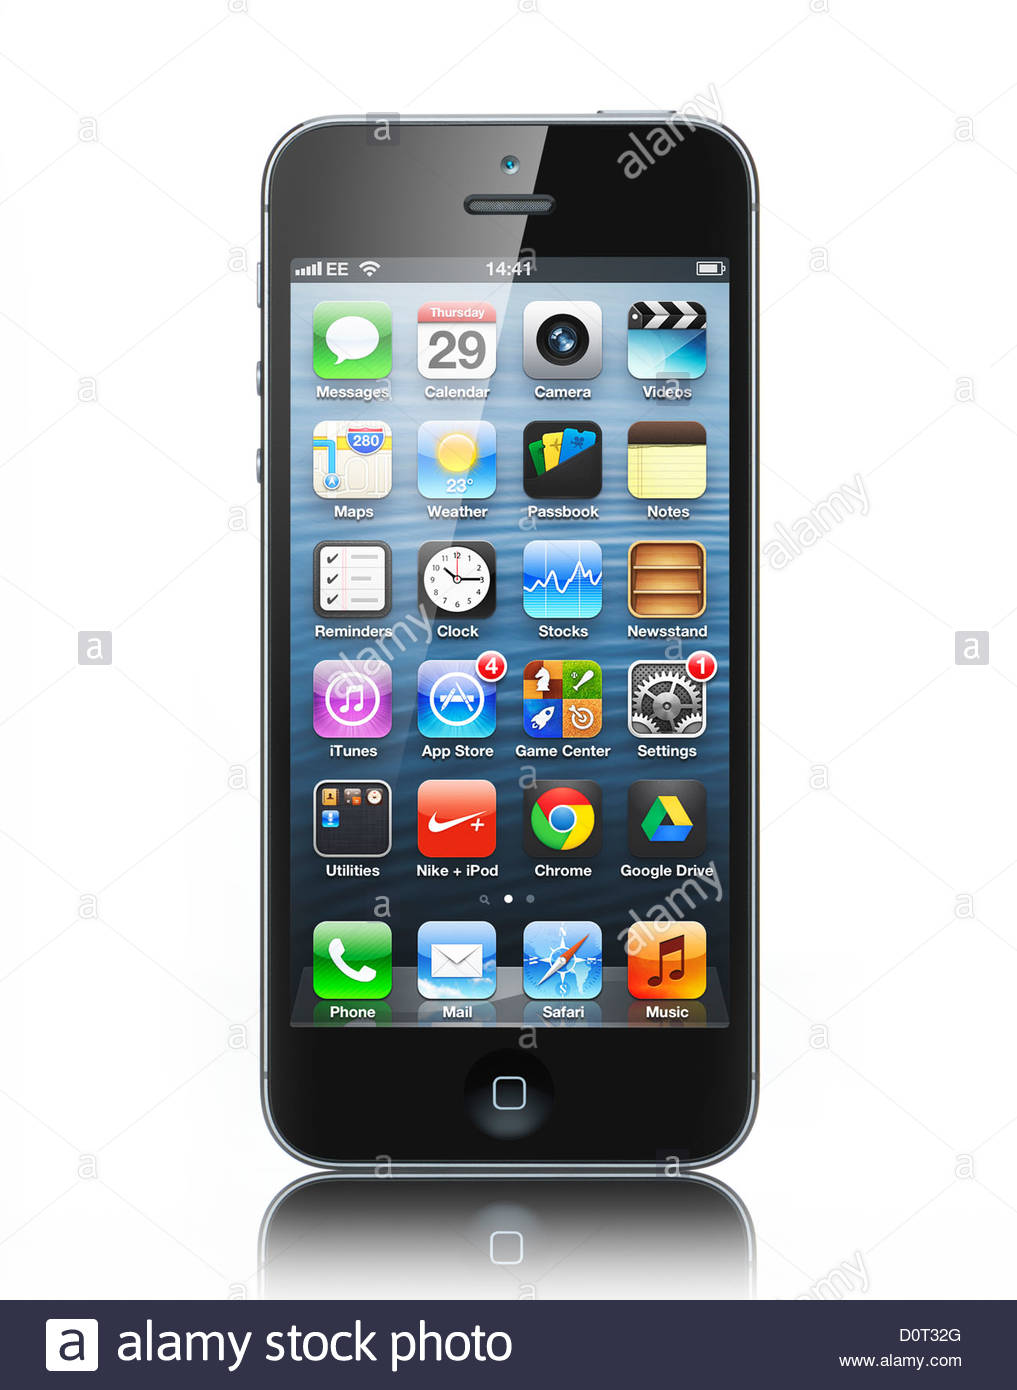 Apple iPhone 5 mobile phone with Main screen touch pad ...